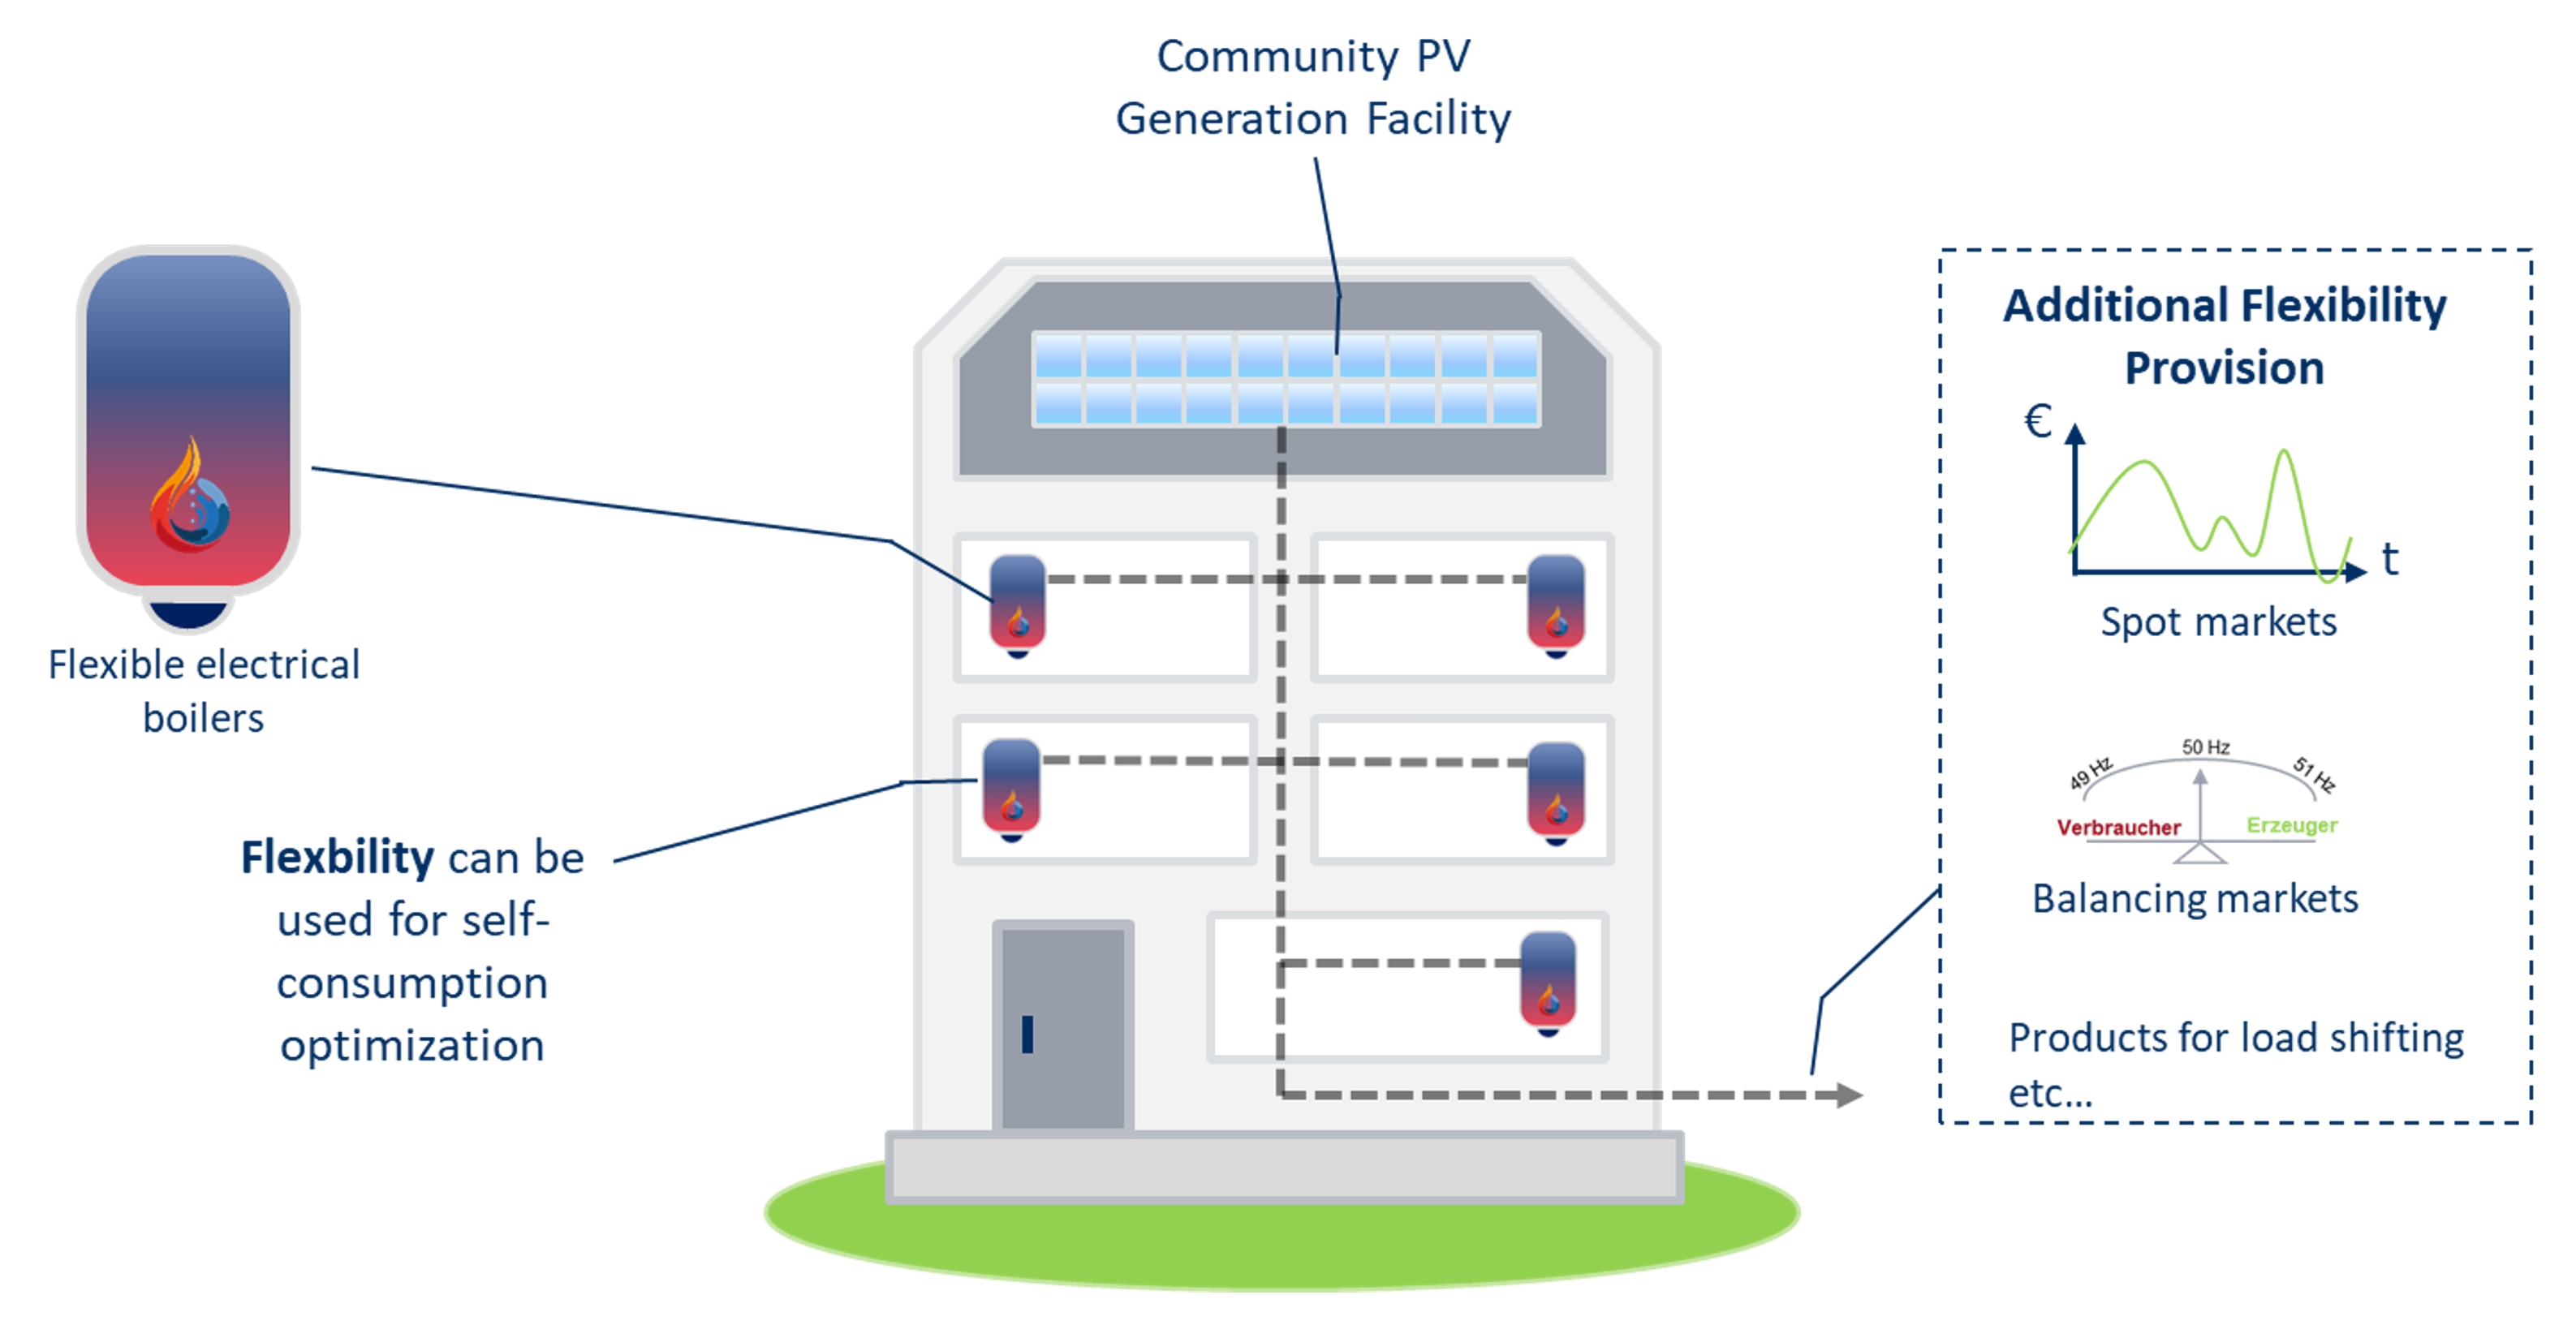 Illustration: The project HoWaFlex2Market is investigating how apartment buildings with community PV generation systems and smart electric boilers in each apartment can increase self-consumption. At the same time, the flexible use of the boilers should enable integration into spot and balancing energy markets, as well as other load shifting products.